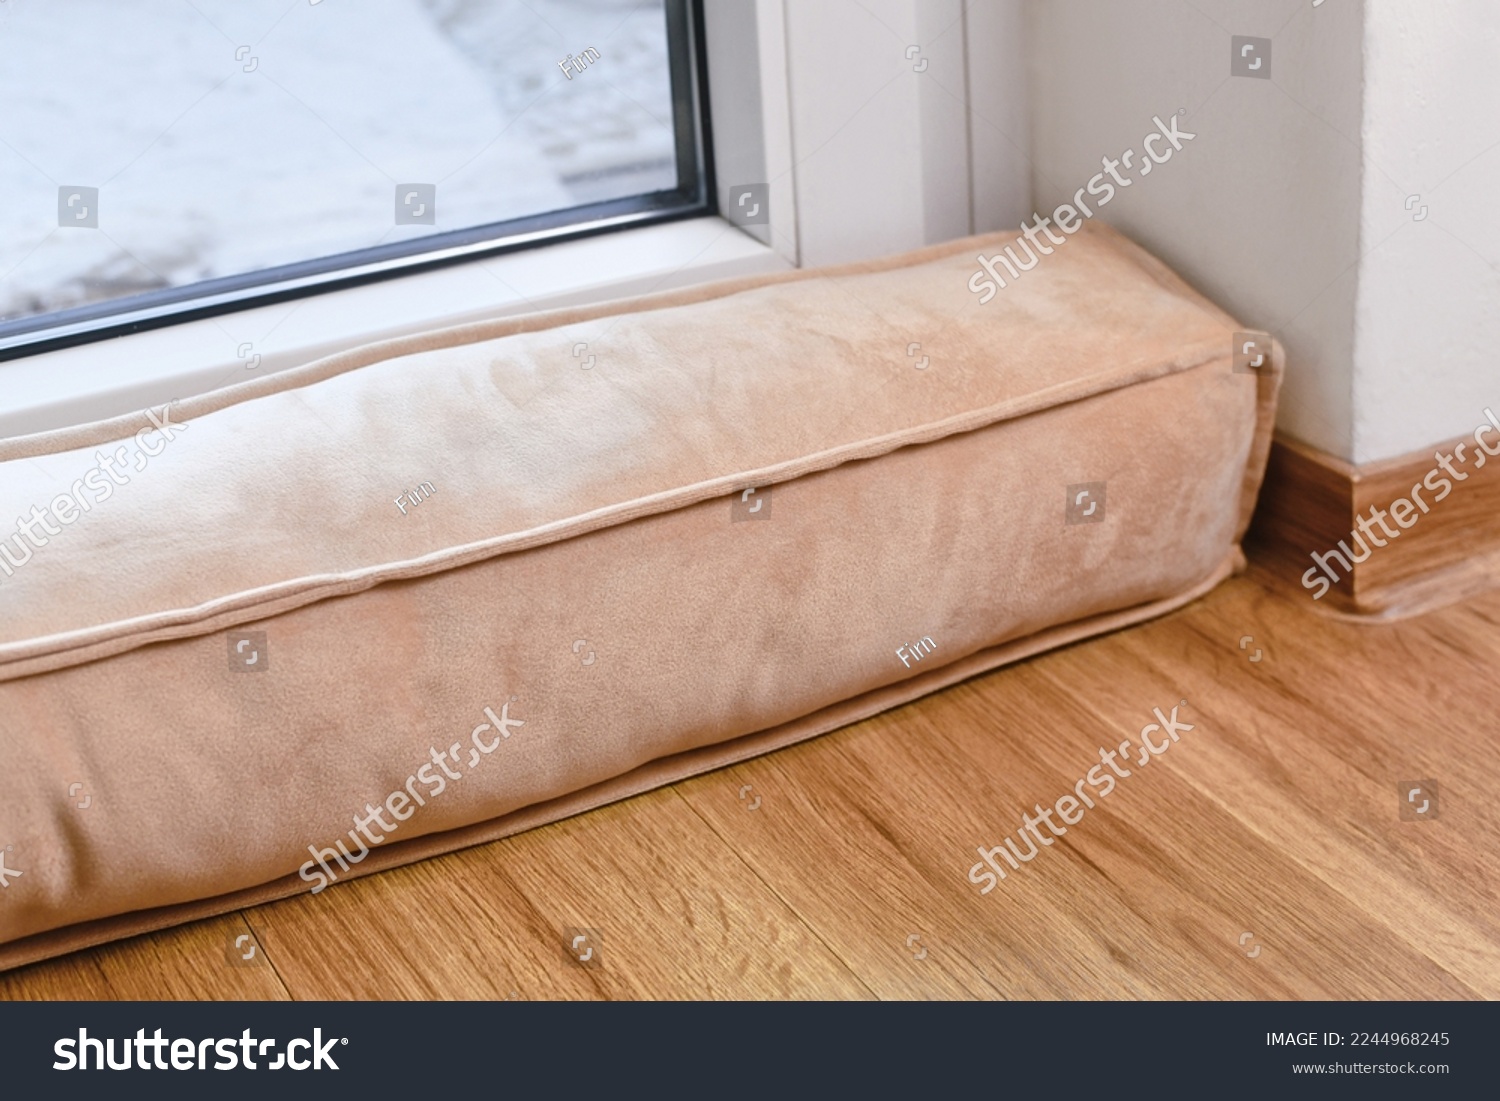 Draft excluder lying in front of door to keep out cold air and save energy for heating in room #2244968245